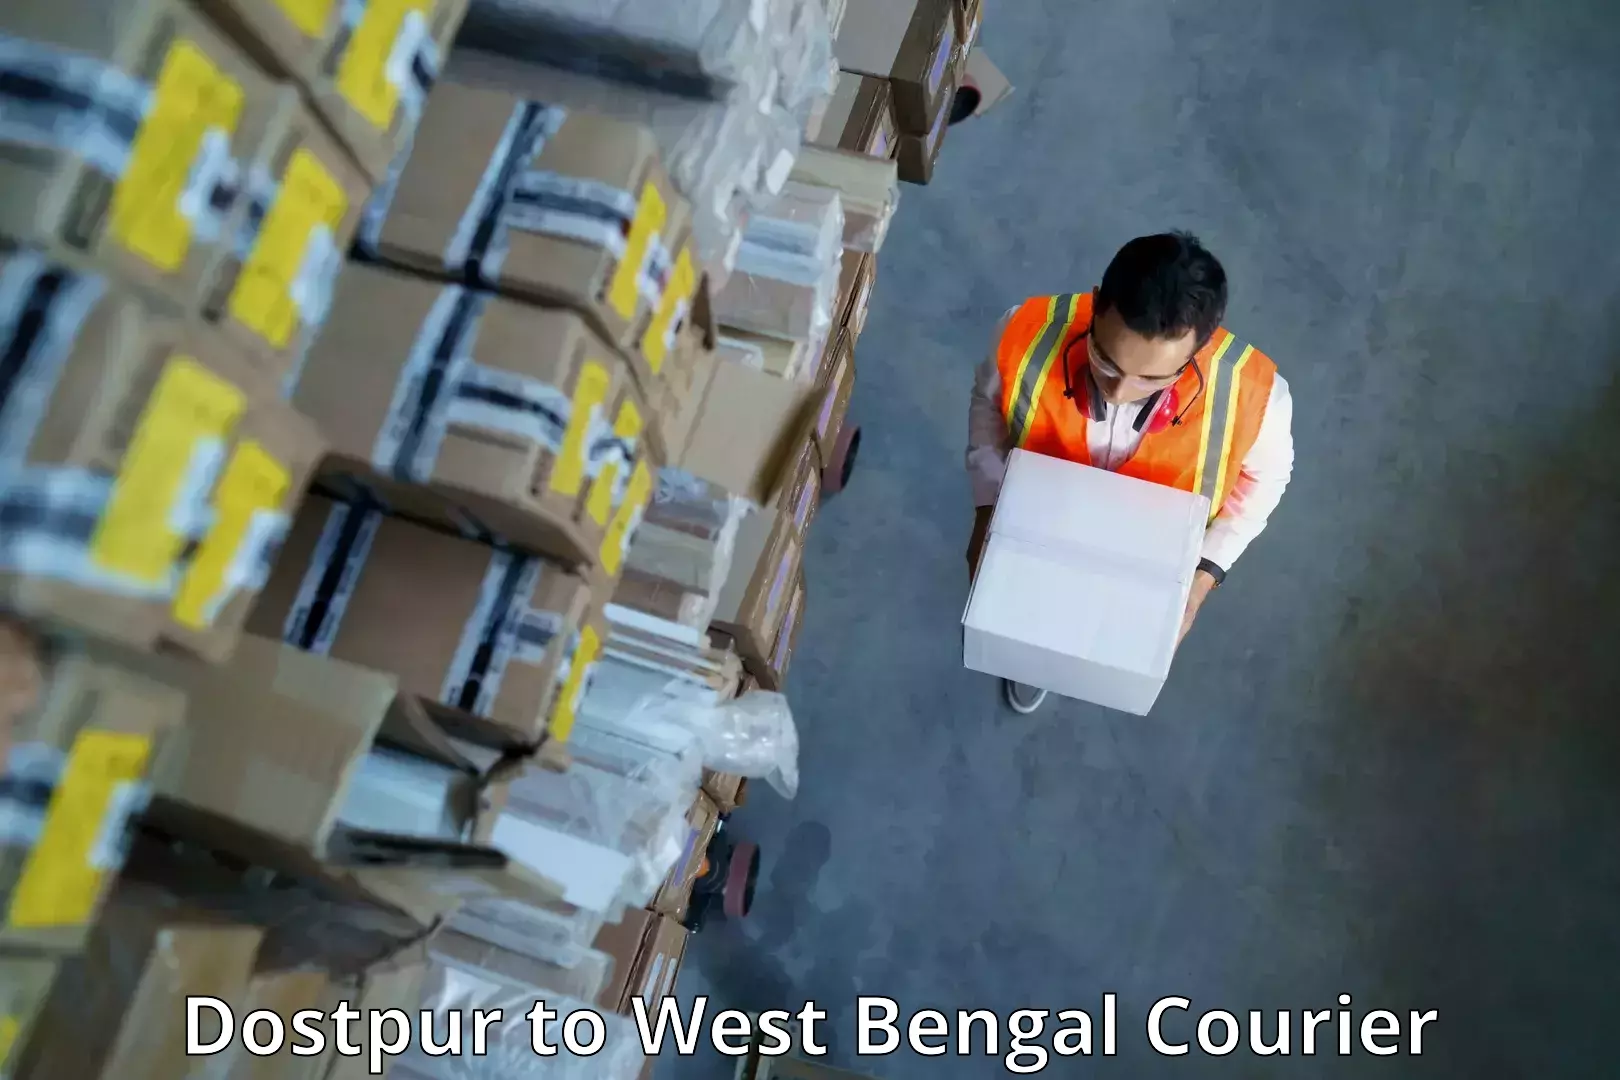 Delivery service partnership Dostpur to Barrackpore